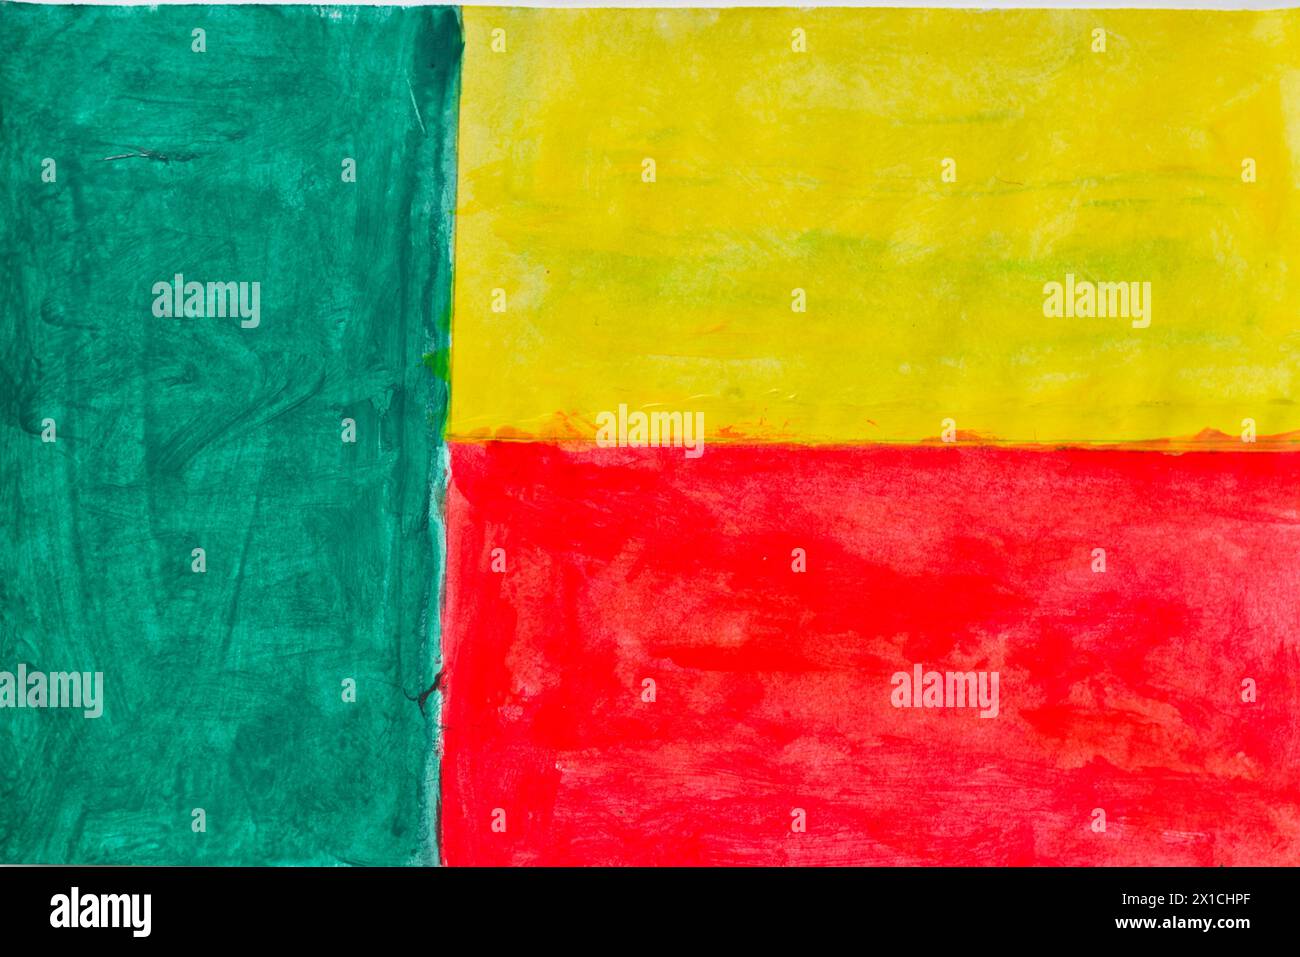 Flag of Benin painted with watercolors on cardboard. Stock Photo